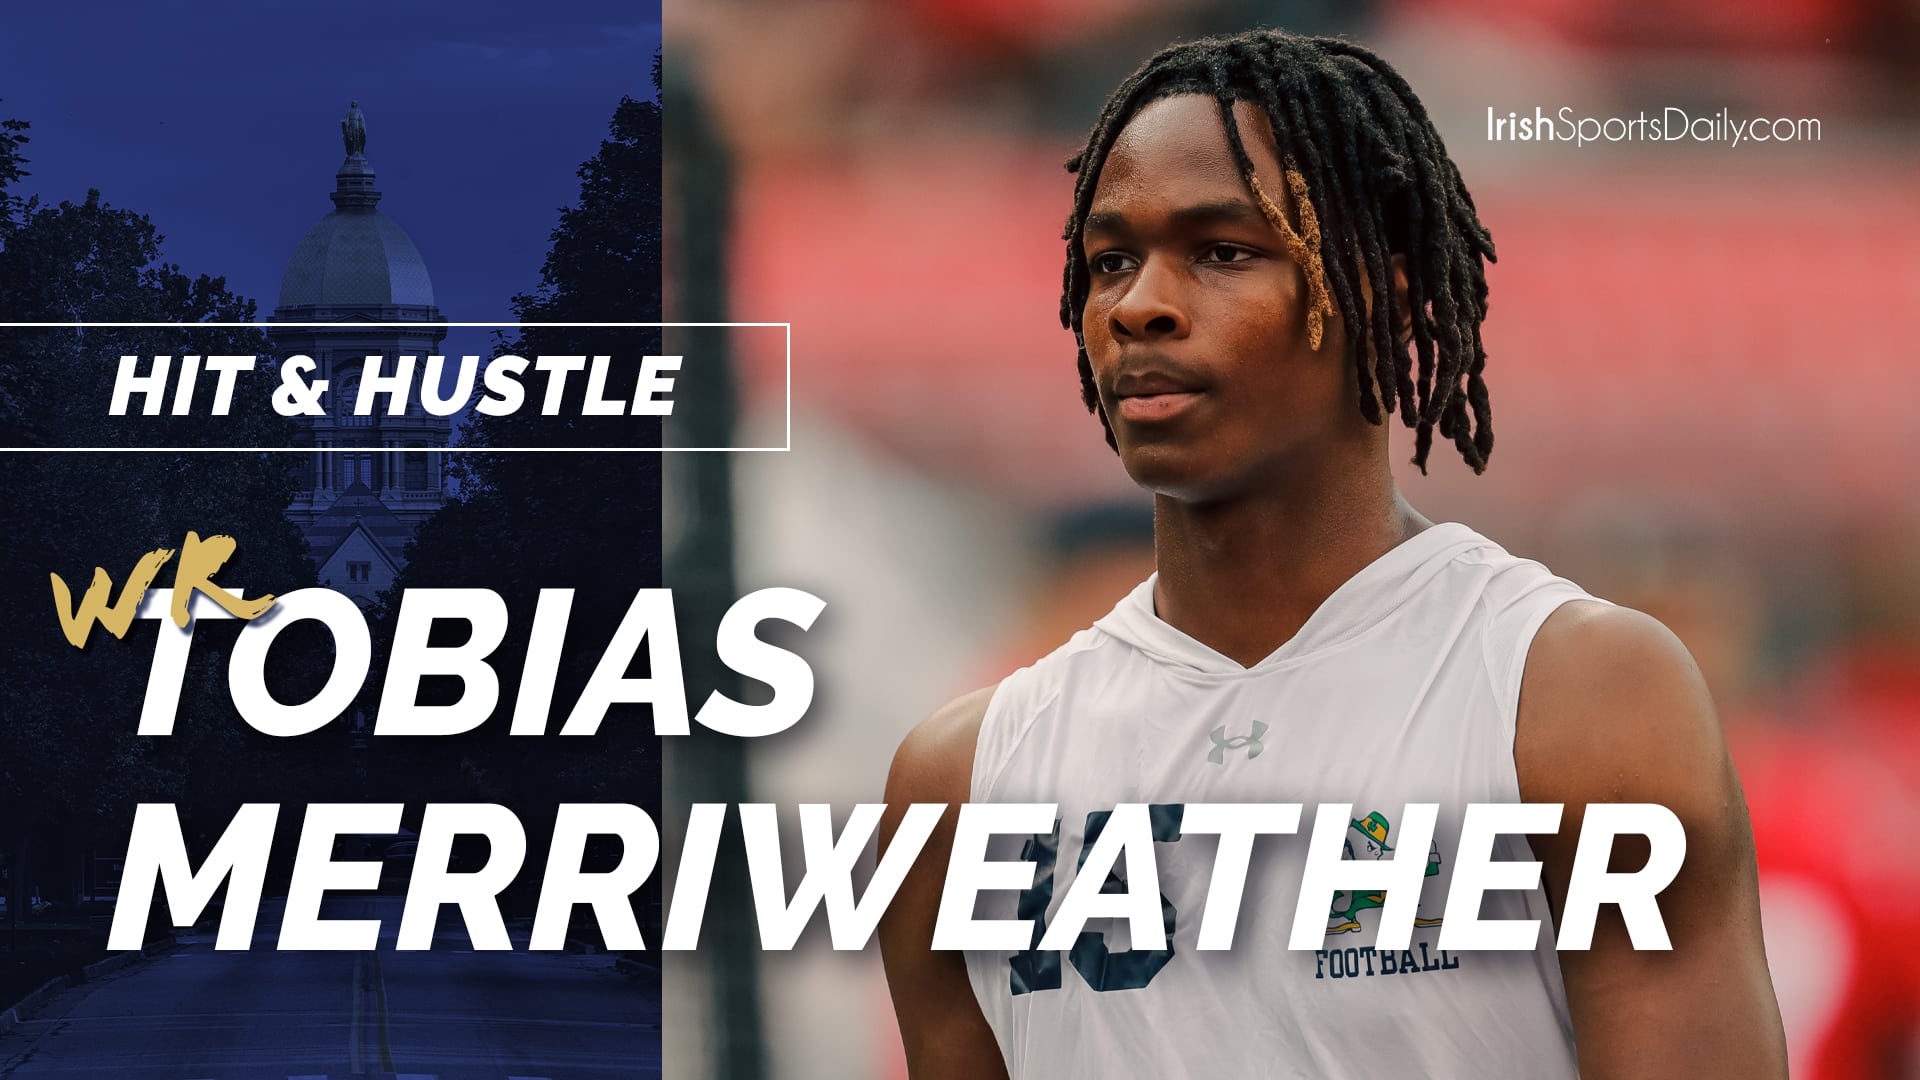 Hit & Hustle: Thoughts On Notre Dame WR Tobias Merriweather